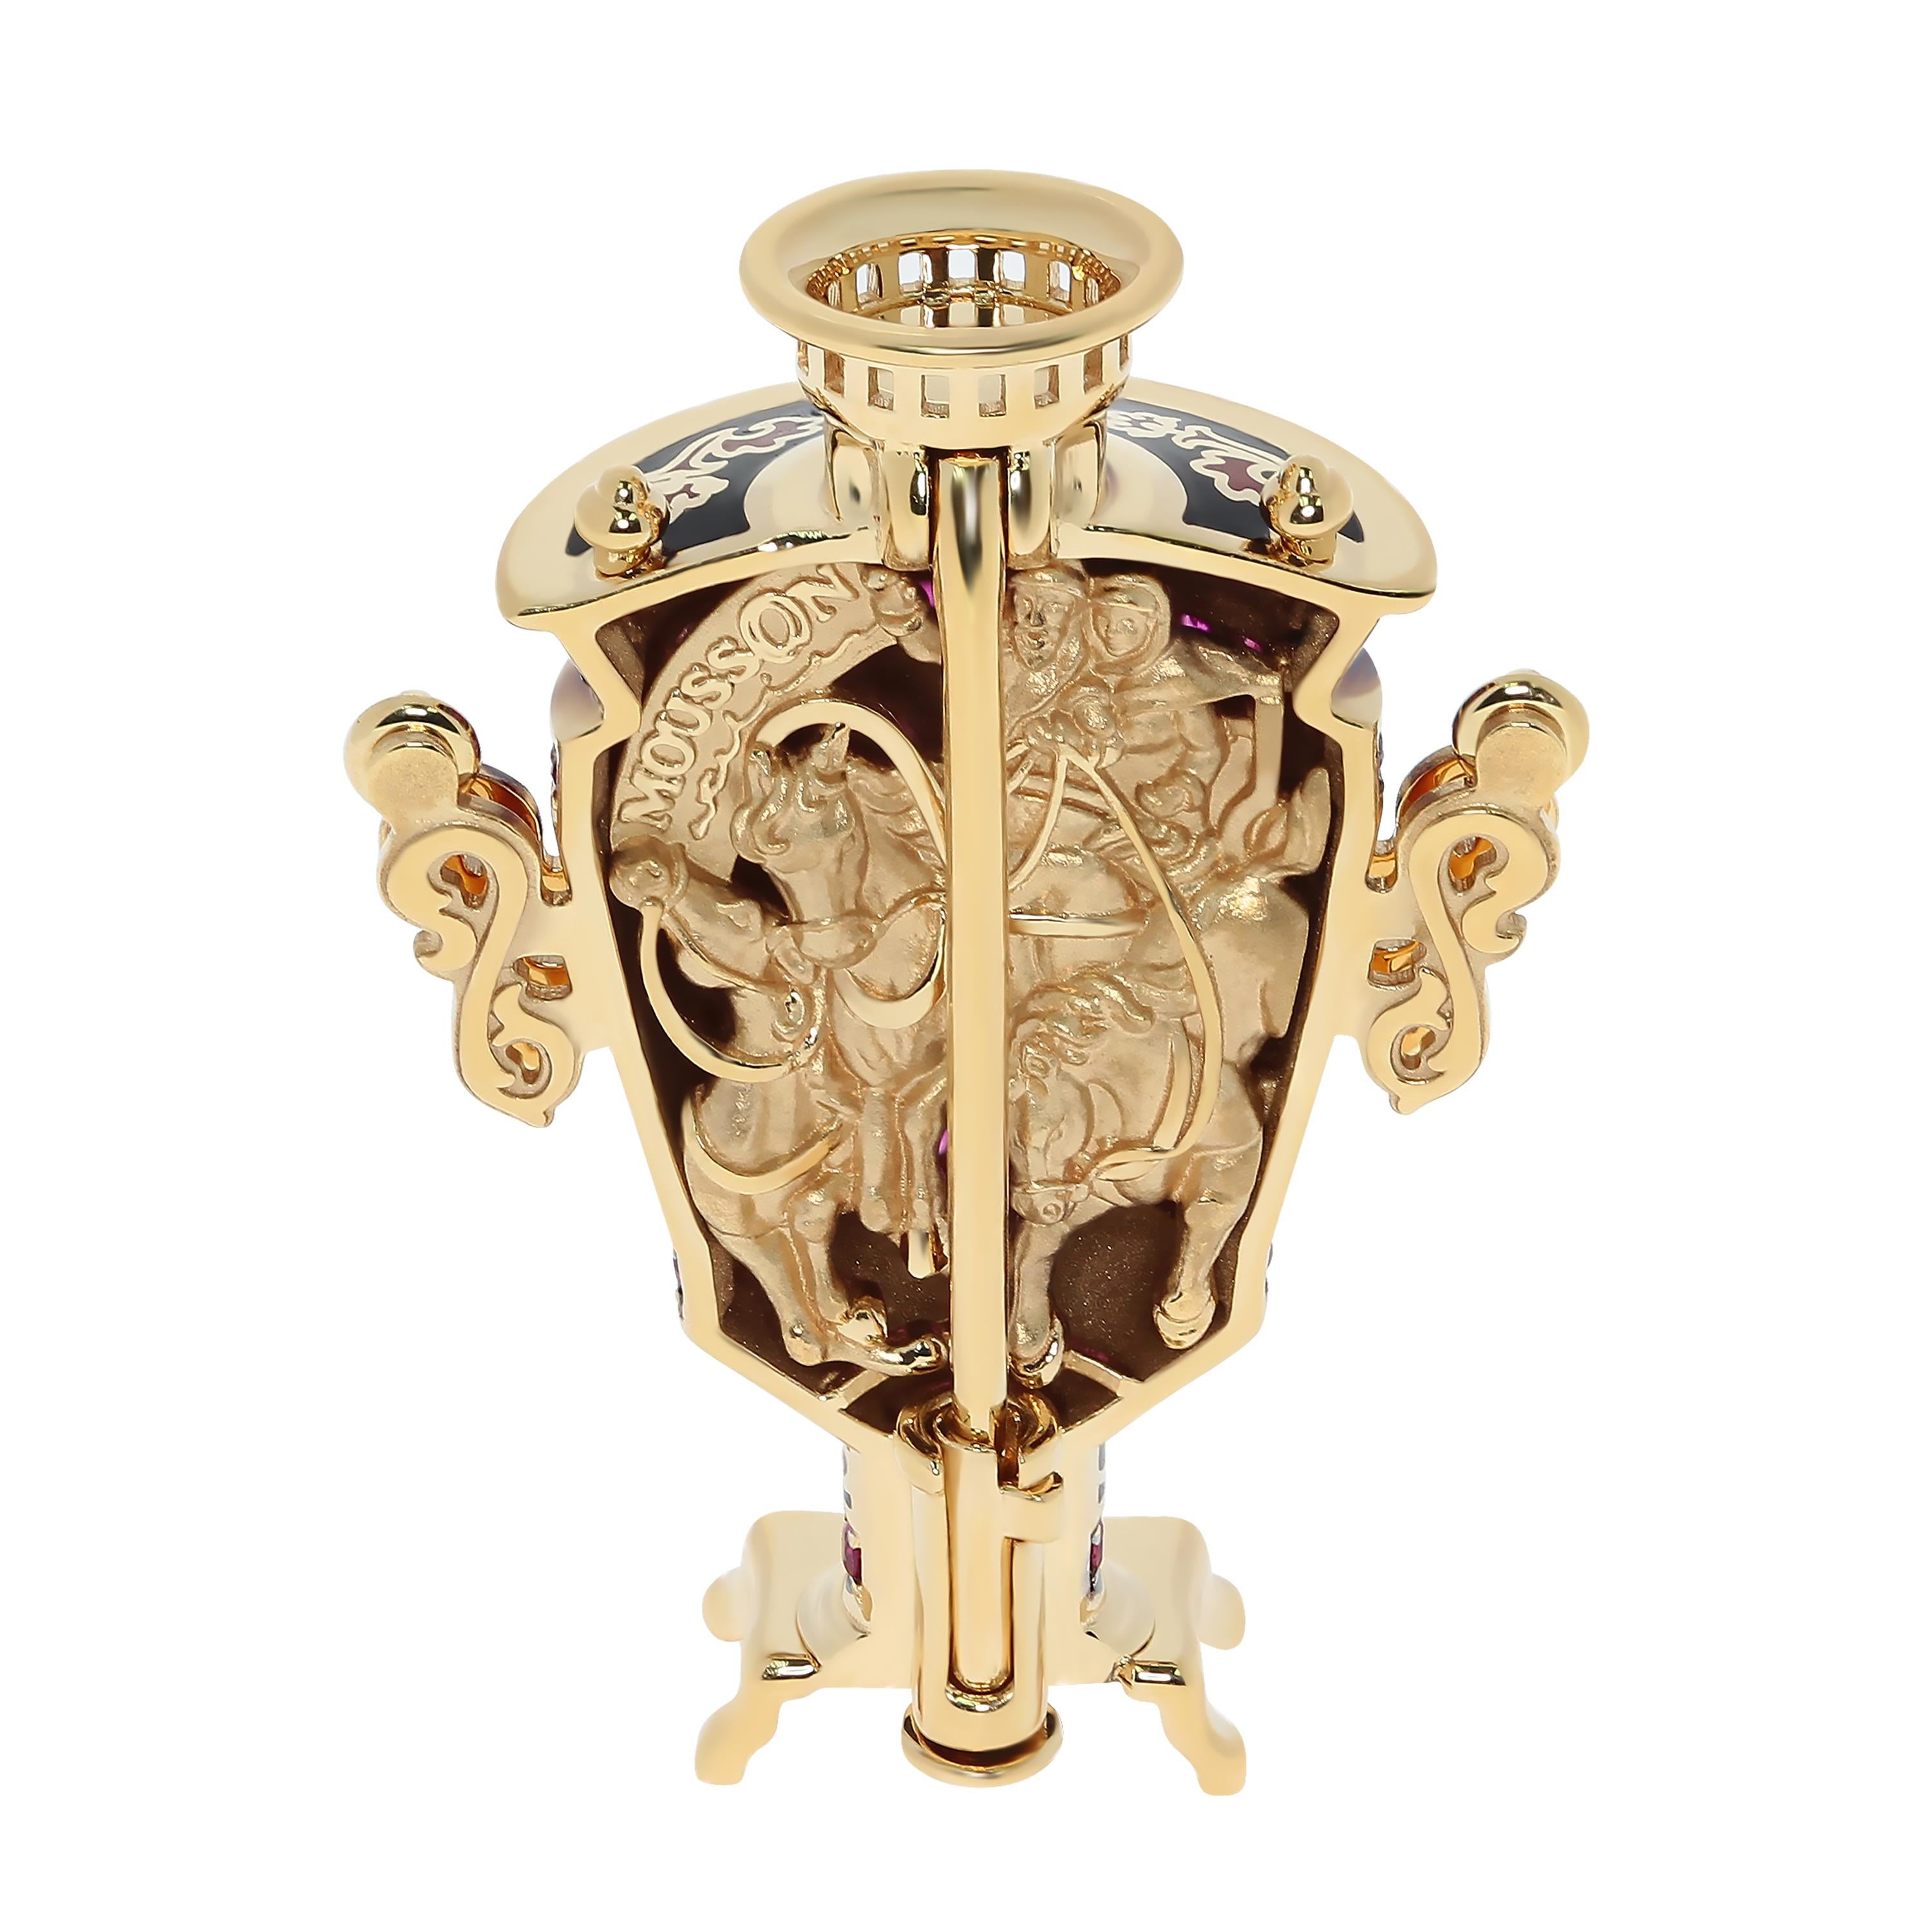 Ruby Enamel 18 Karat Yellow Gold Samovar Brooch
Samovar in Russia is a synonym for a feast with an abundance of pies and tea. A guest in the house, a samovar on the table - these are Russian traditions. Our samovar-brooch is made of Yellow 18 Karat